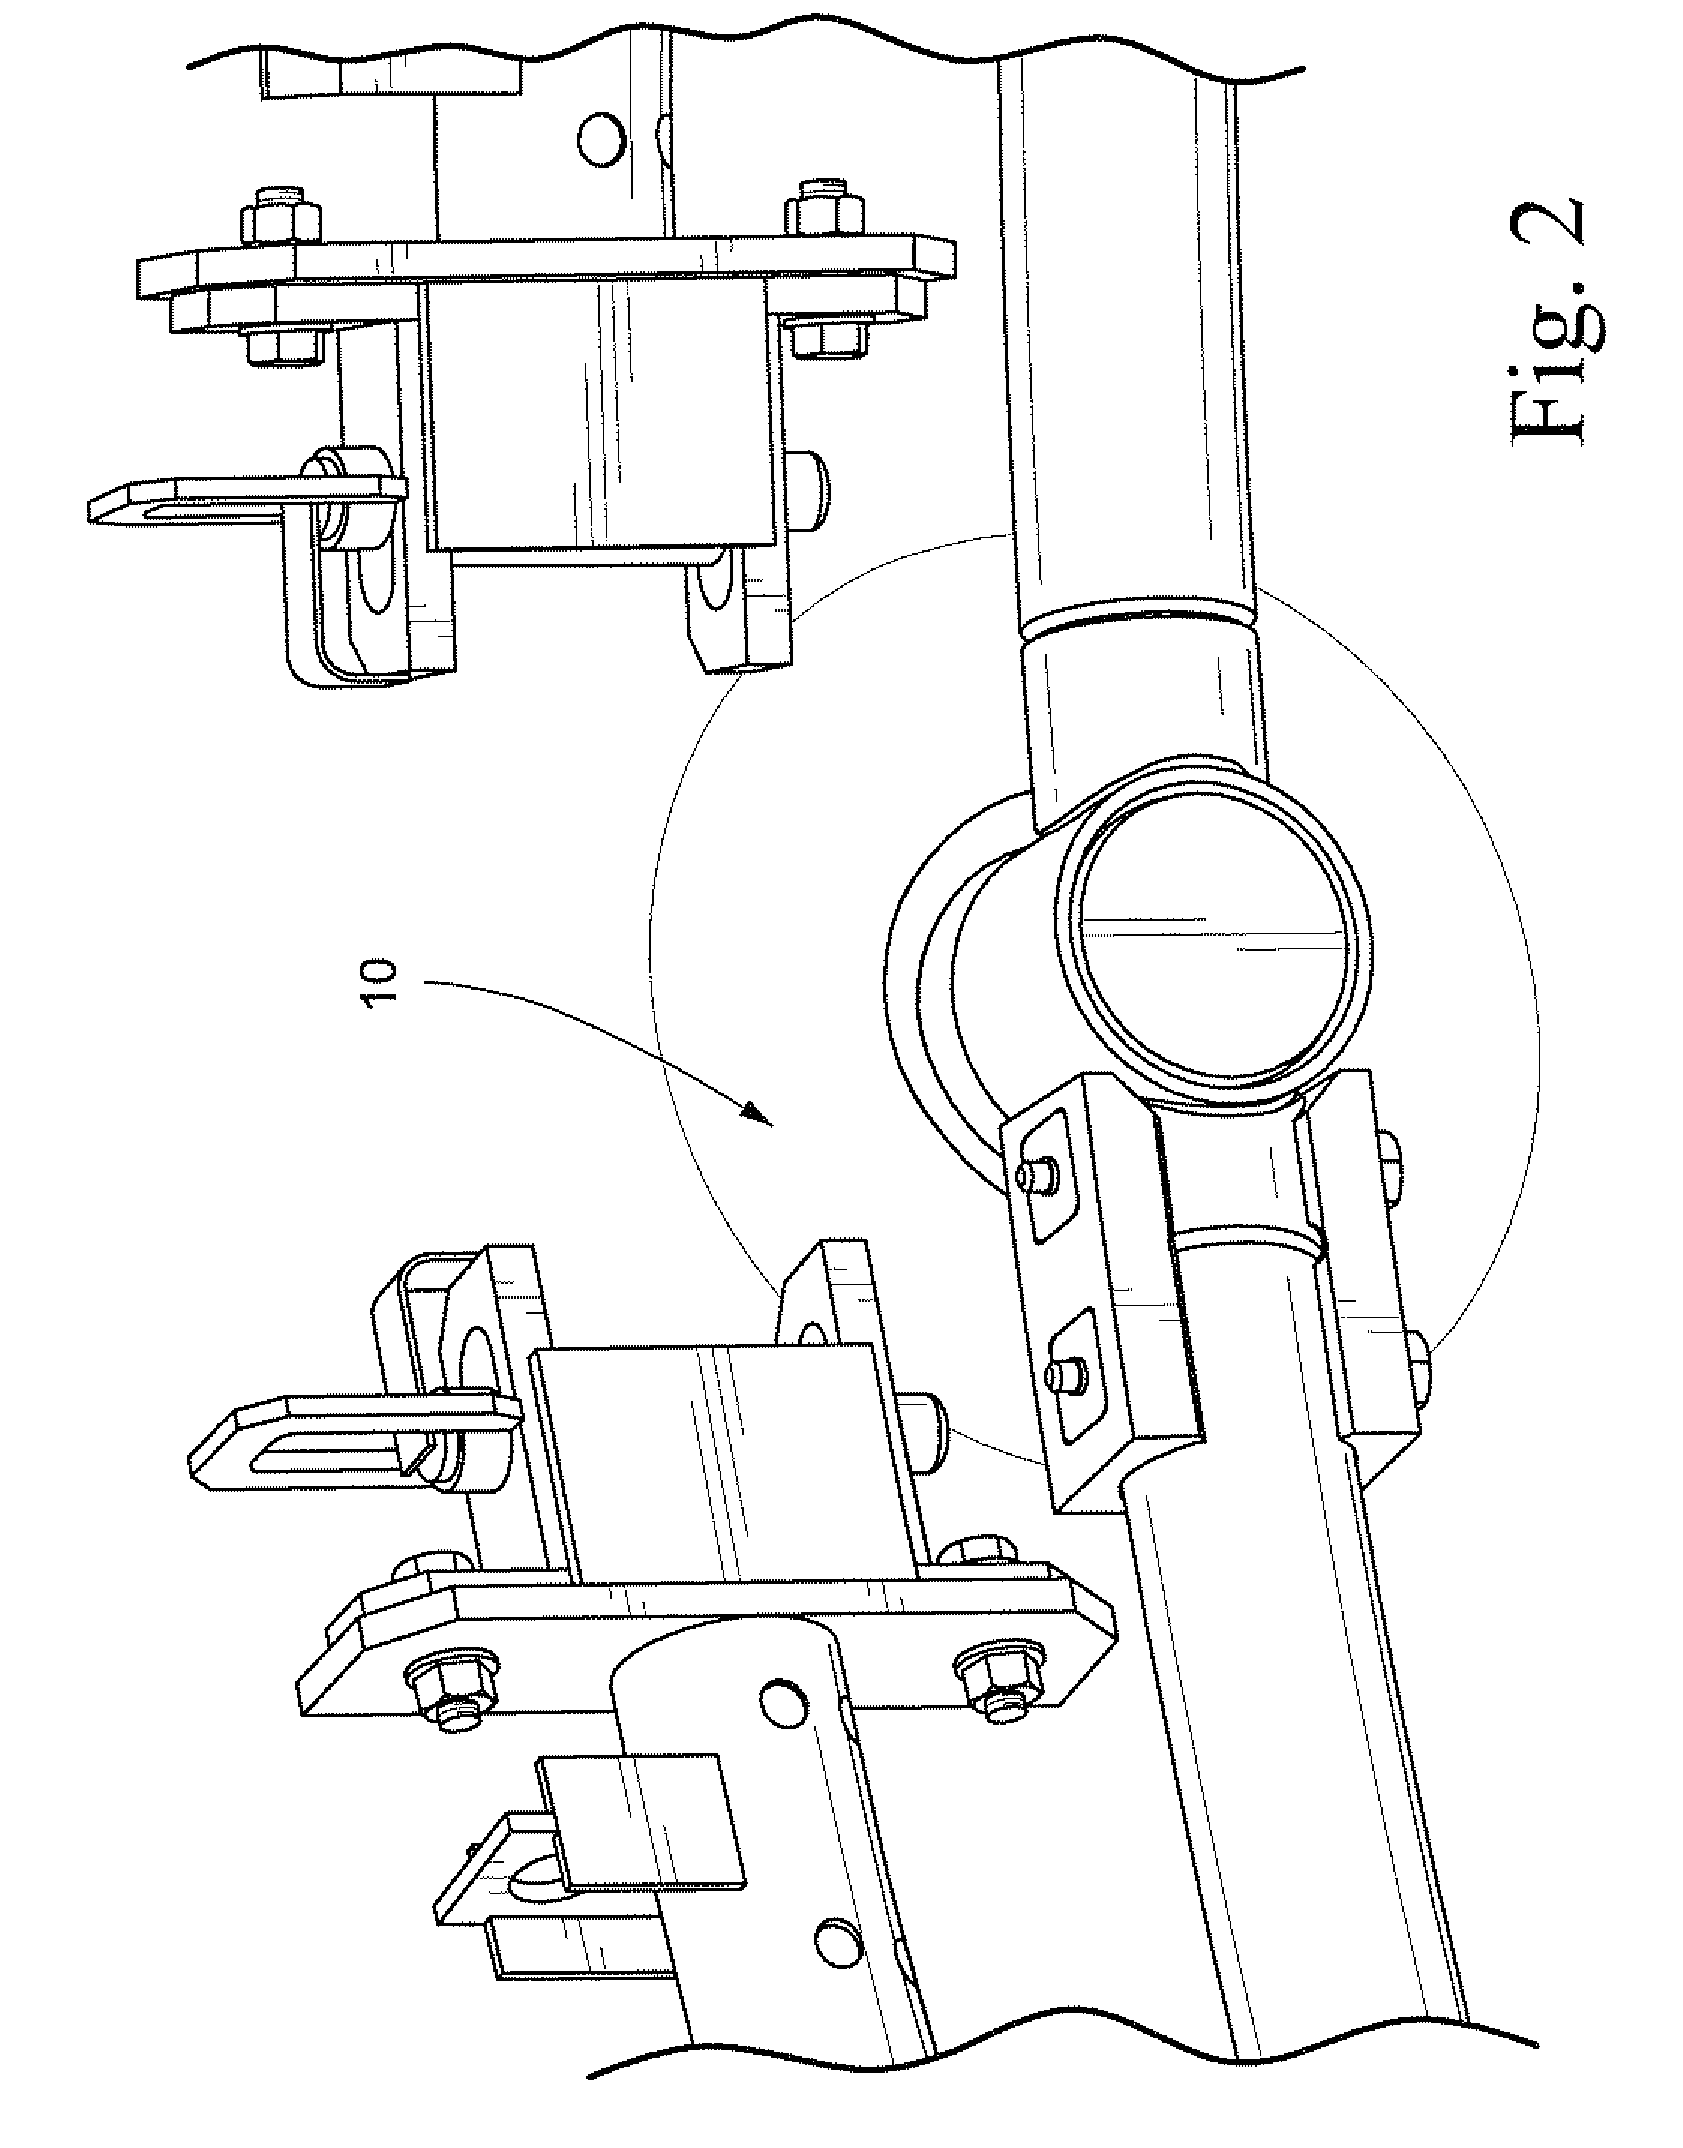 Apparatus and method for repairing a core spray line pipe weld joint